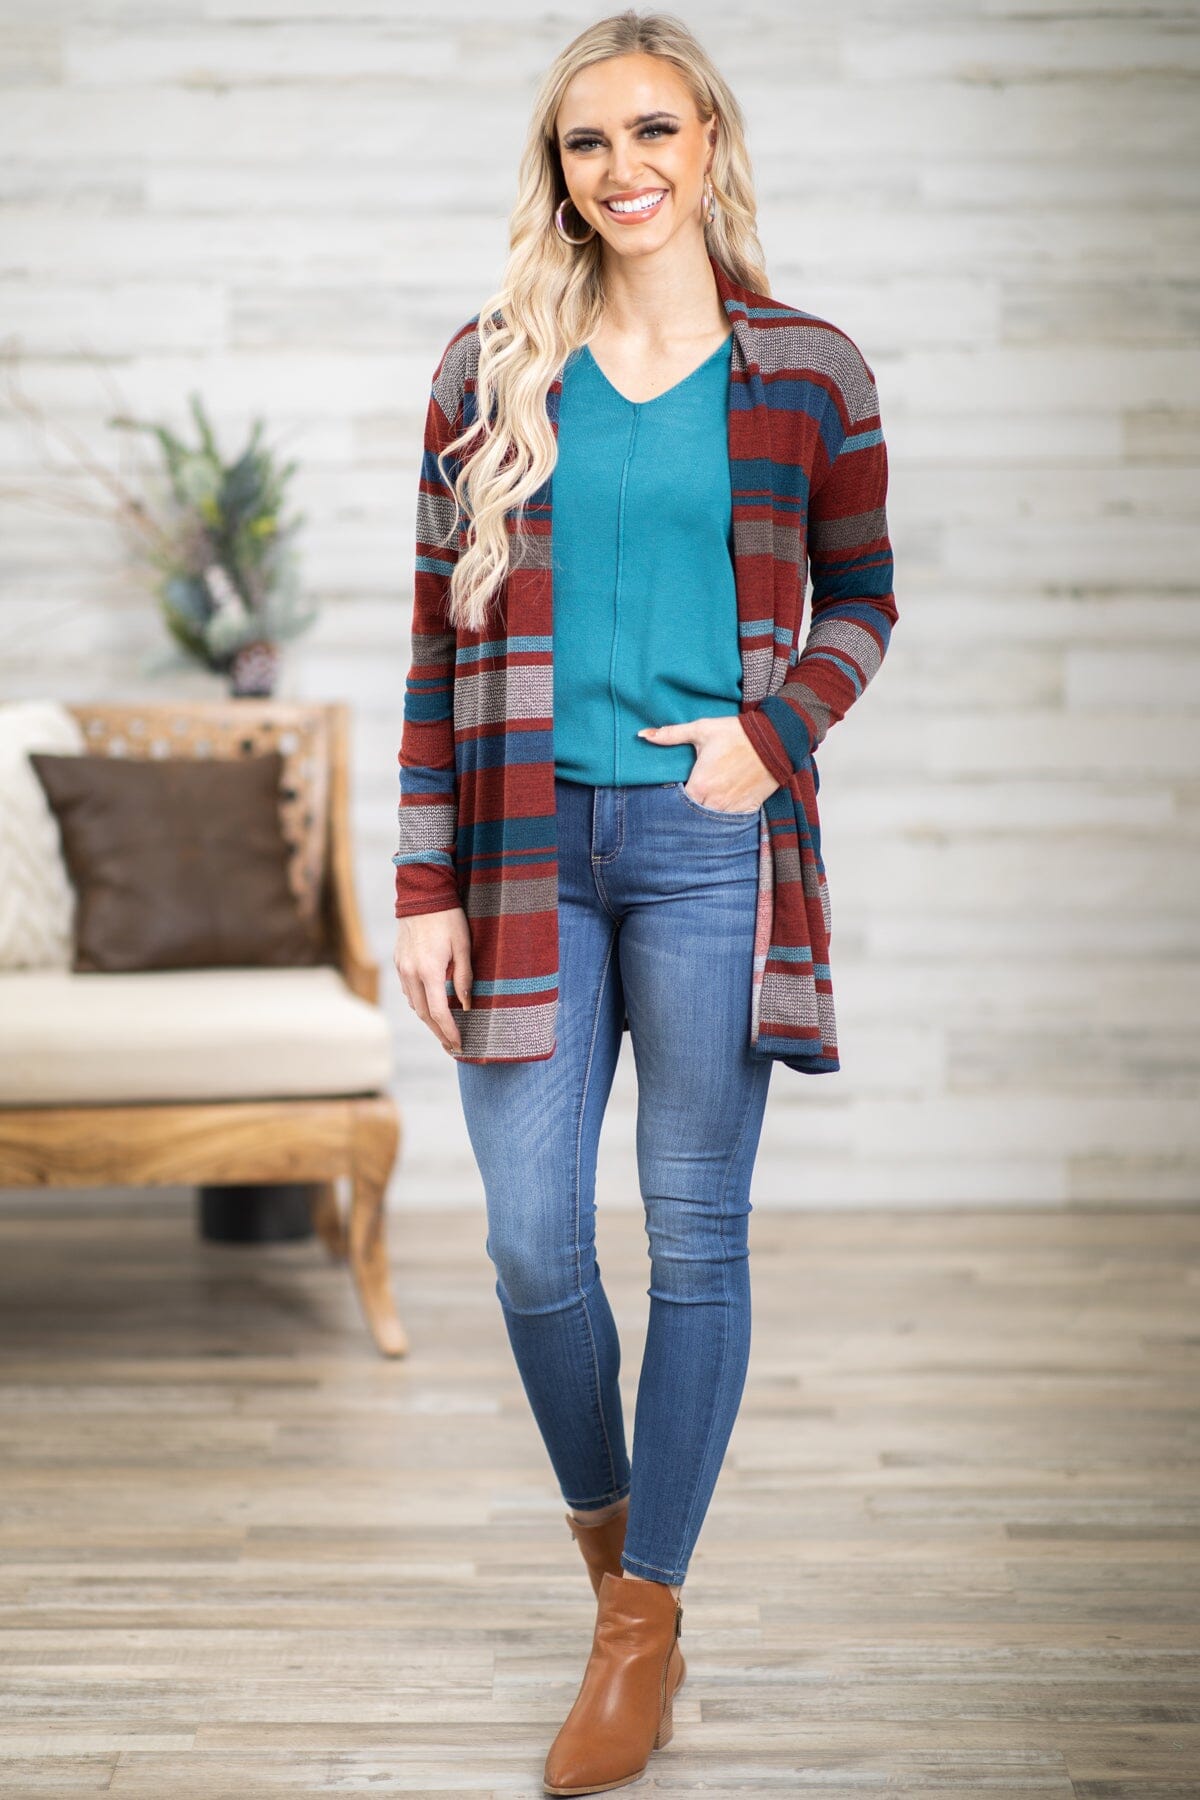 Cranberry and Blue Stripe Cardigan - Filly Flair